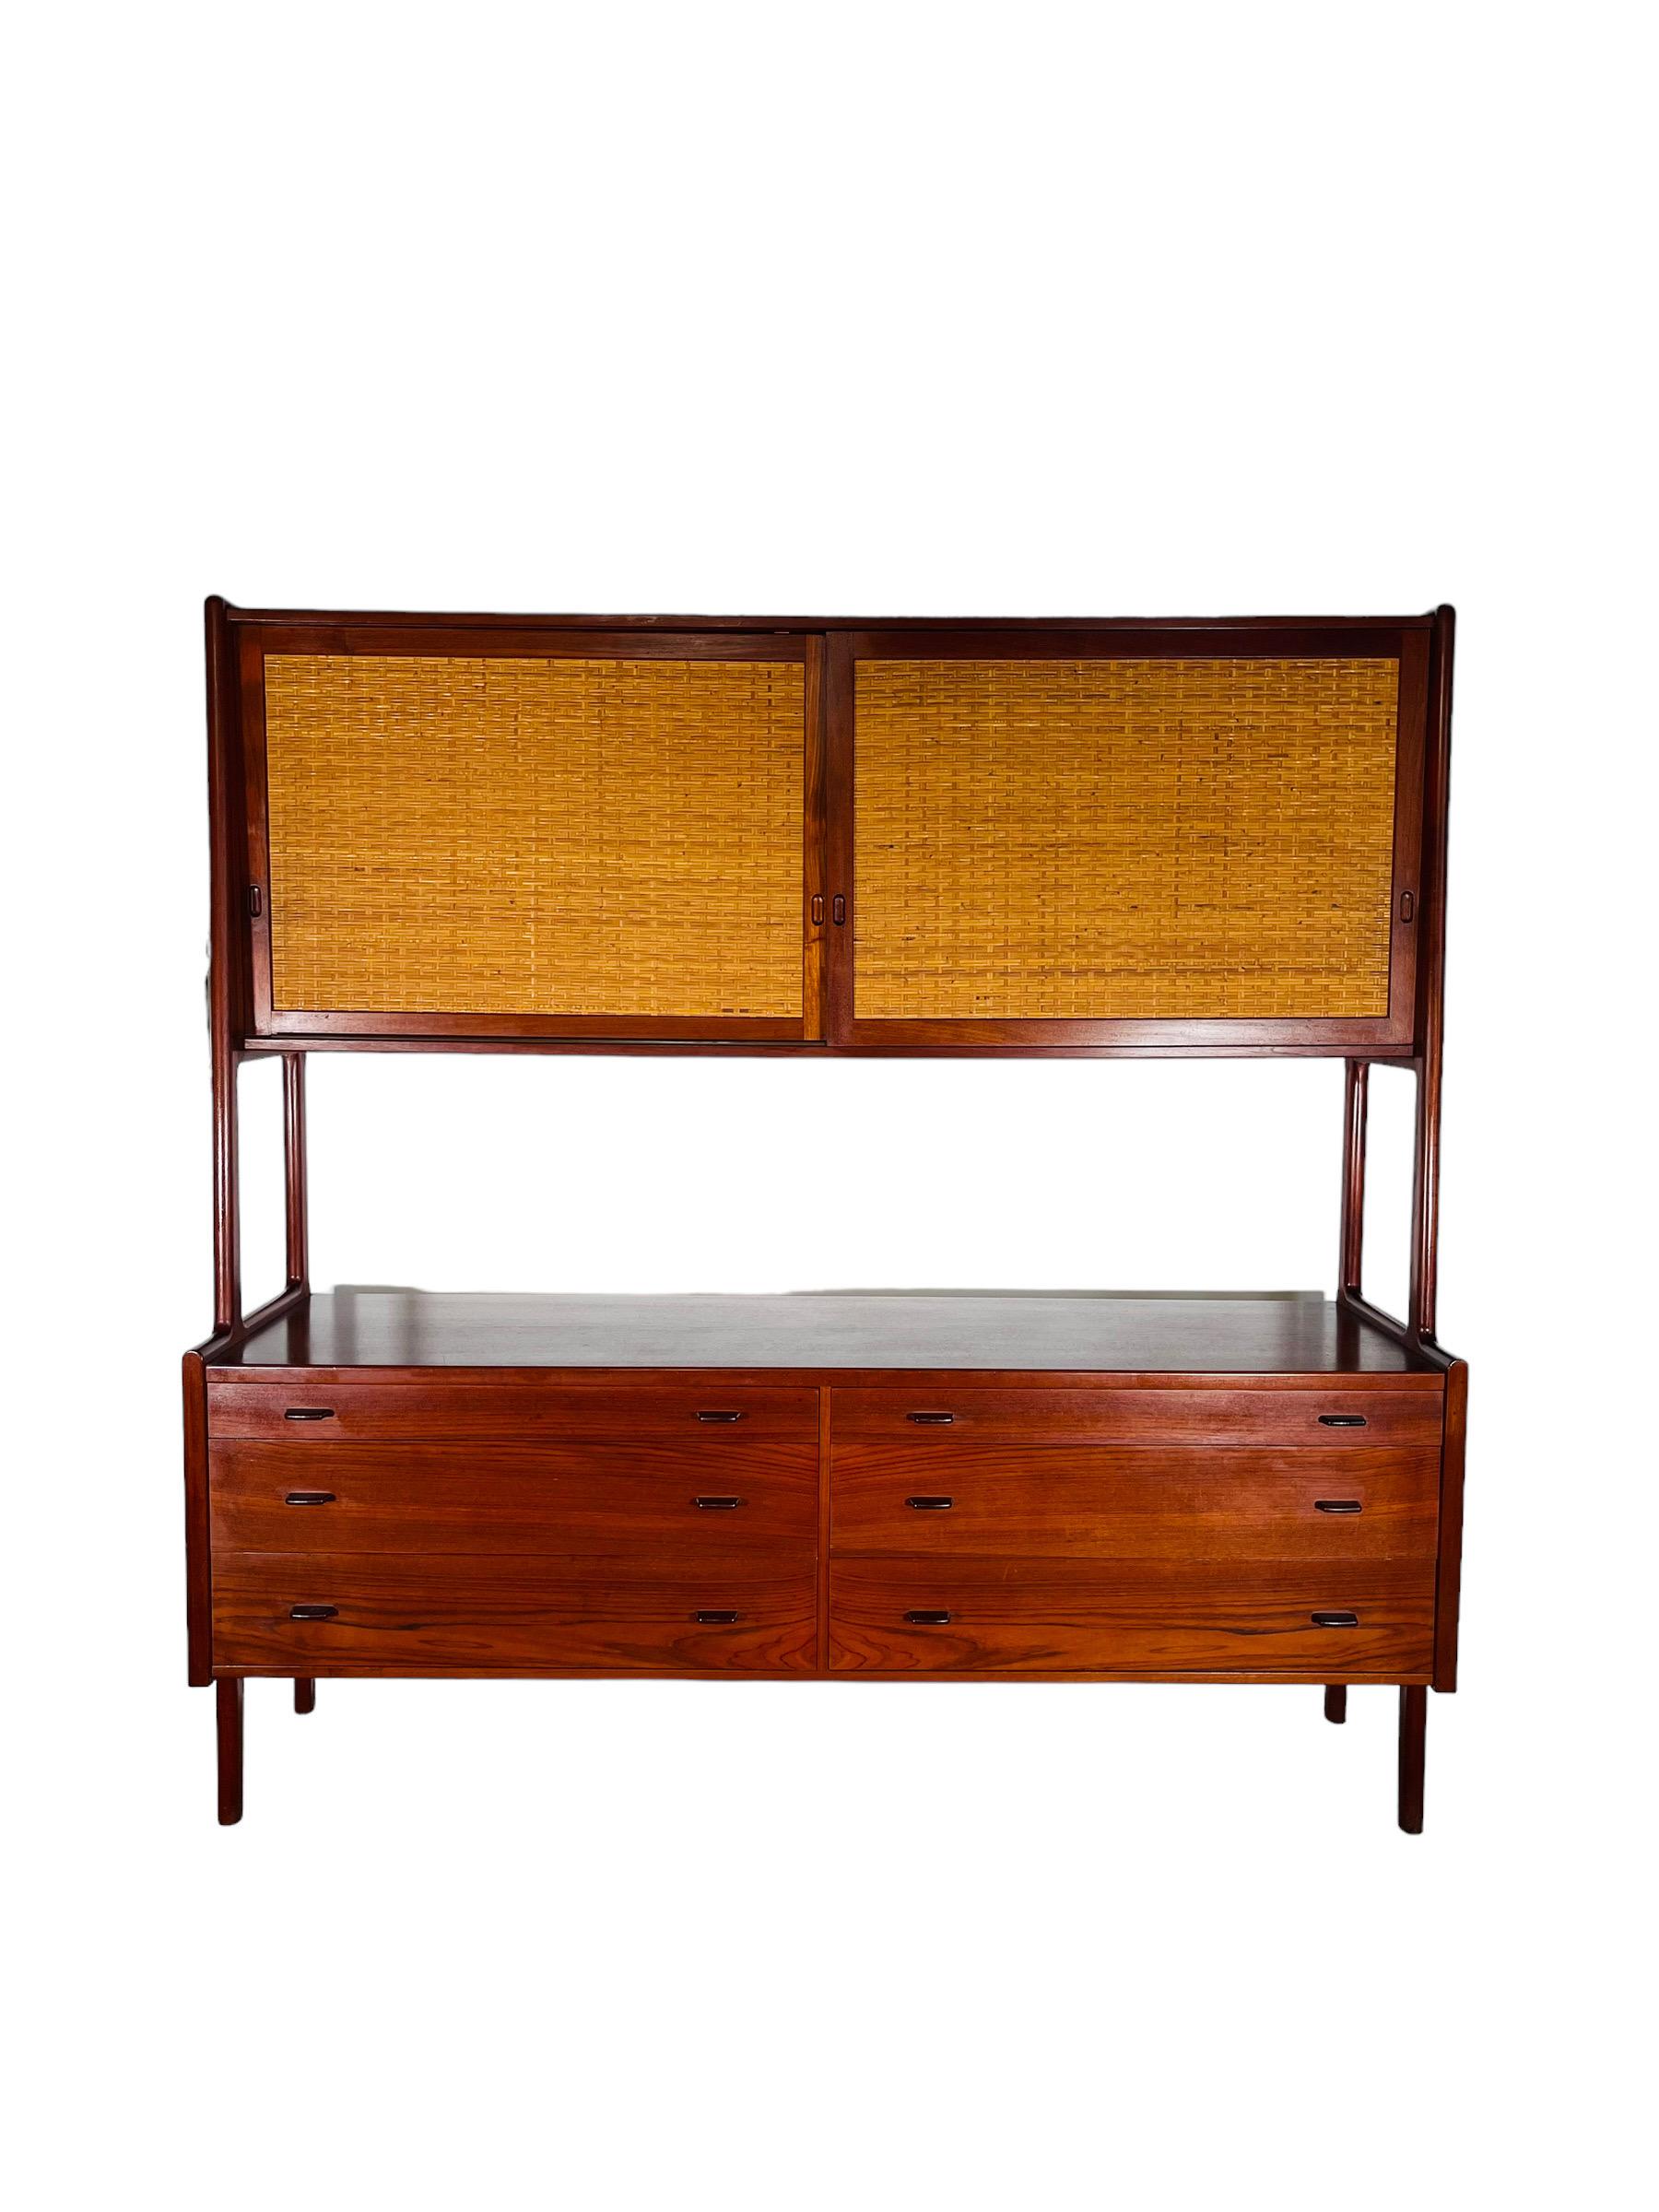 This stunning Hans J. Wegner Danish teak credenza is the perfect addition to any modern home. Crafted from solid teak wood, this credenza features a sleek, mid-century modern design with two wicker sliding doors and six drawers for ample storage.